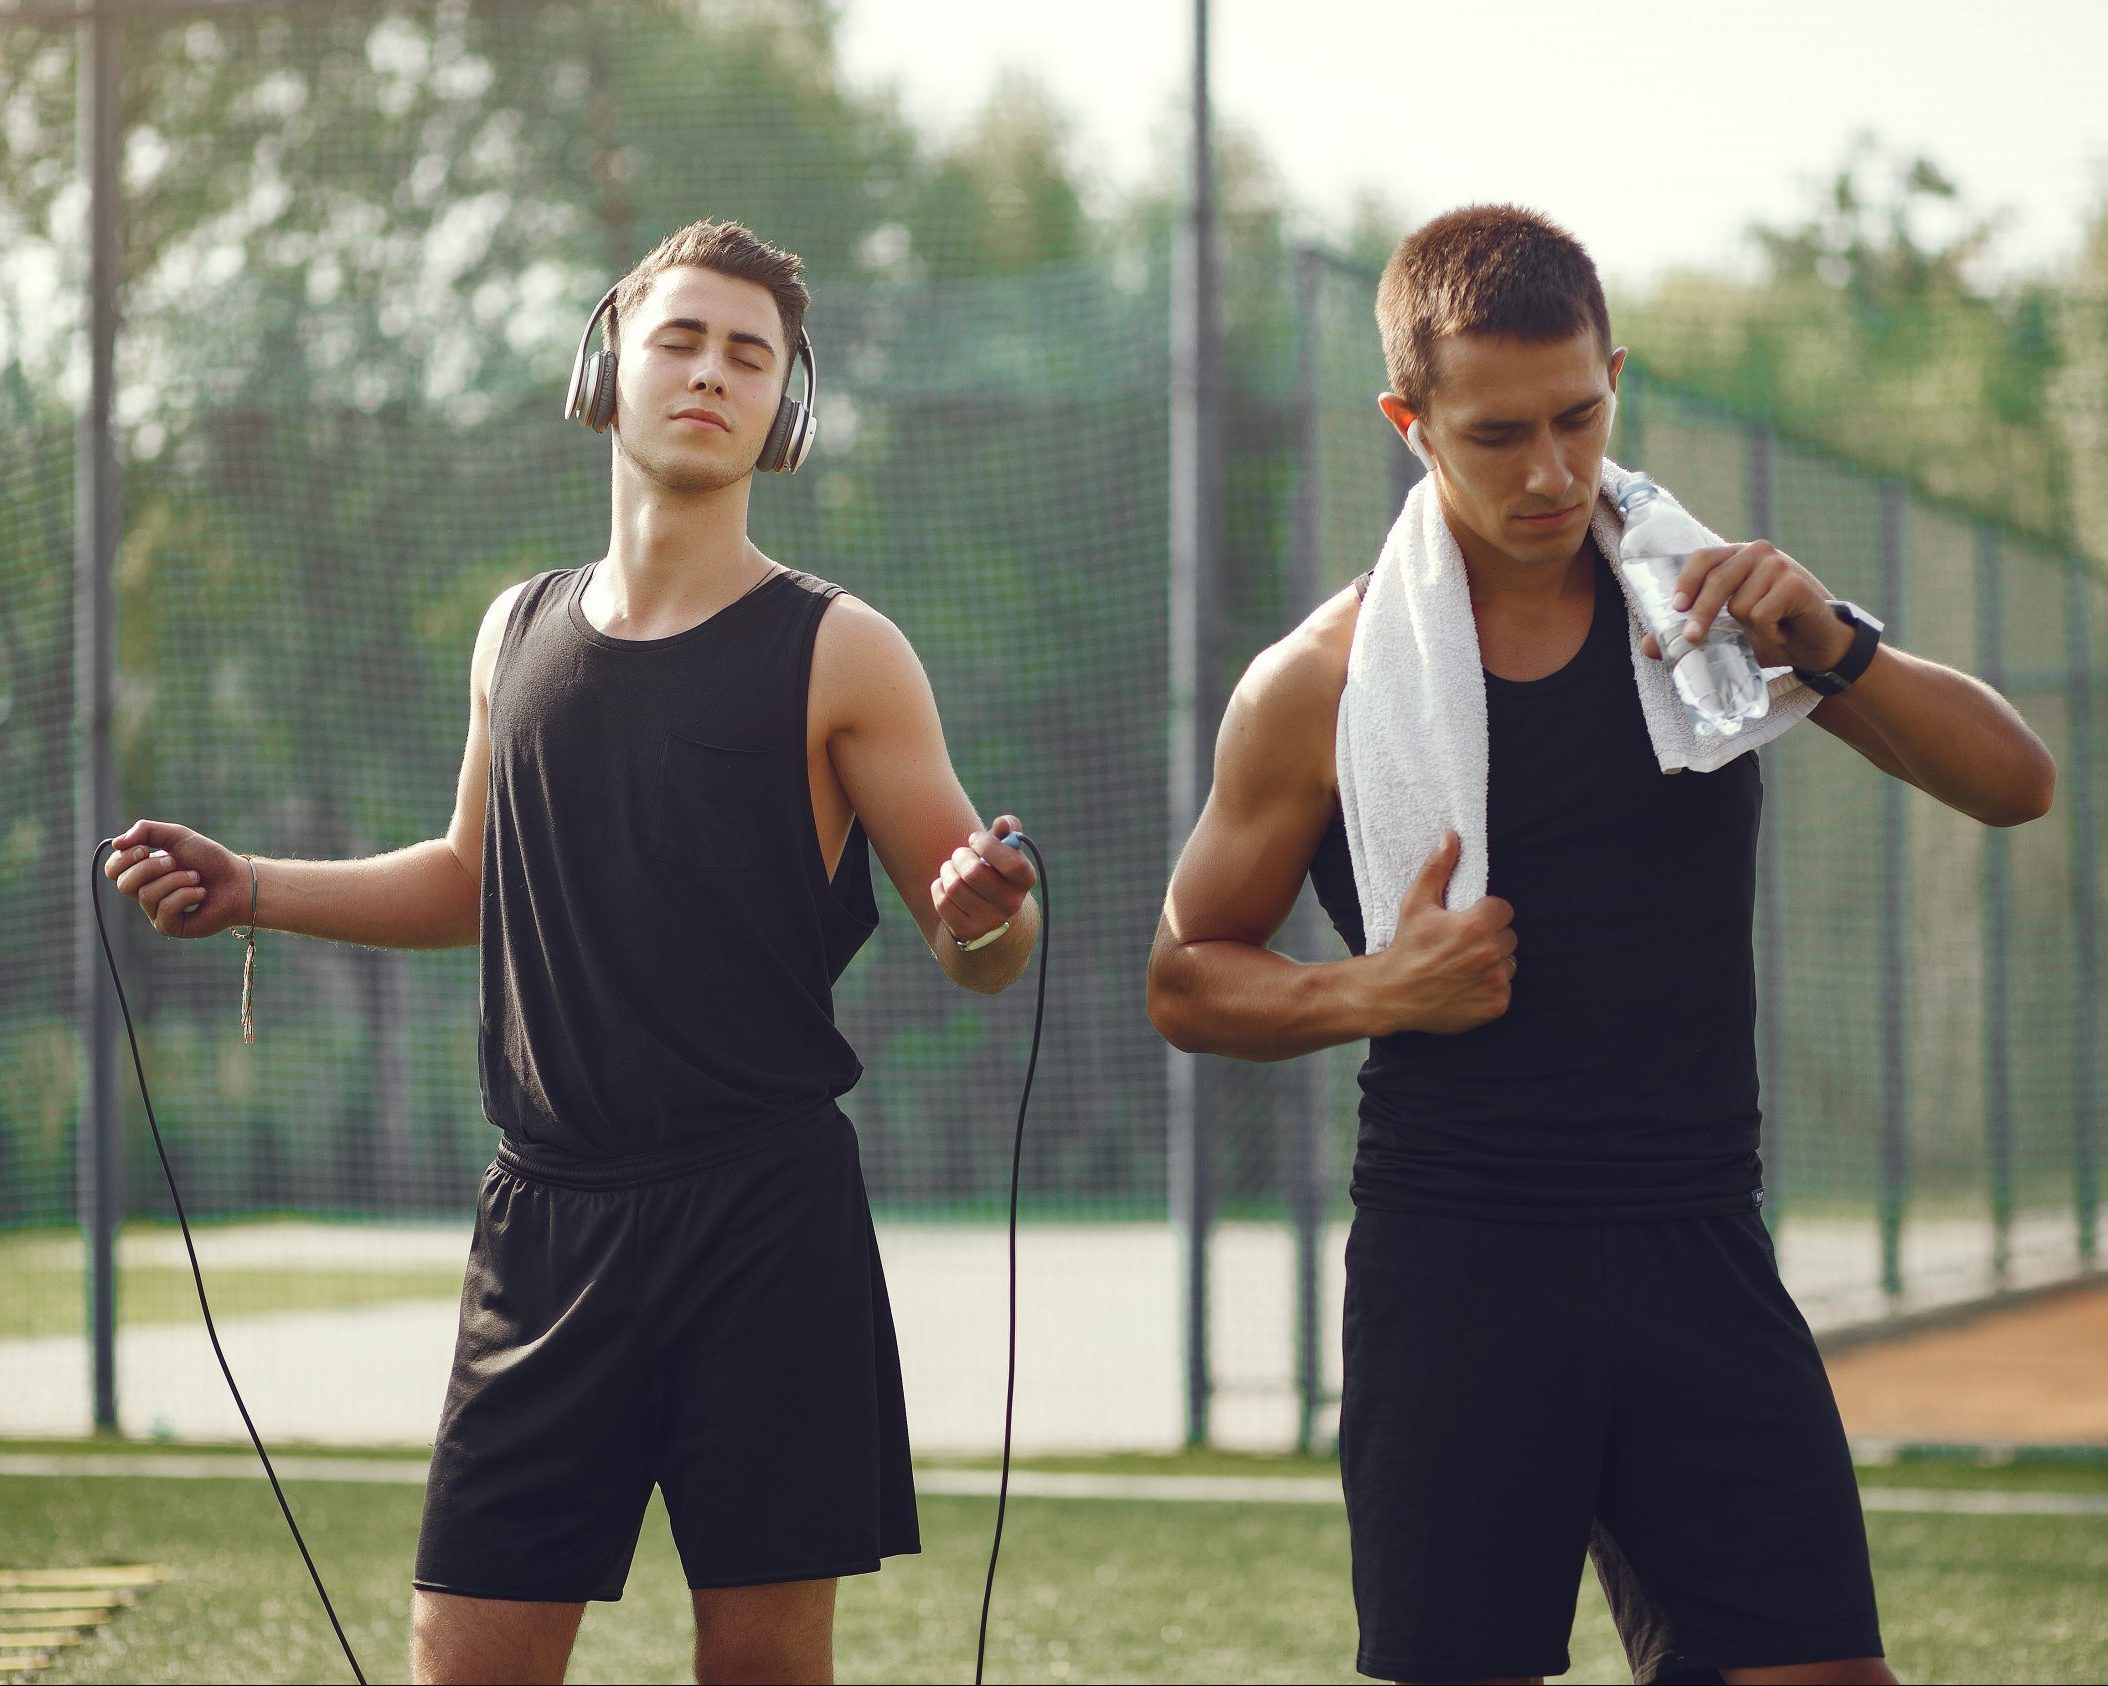 Men in a city. Guys in a sports clothes. Male drinking a water